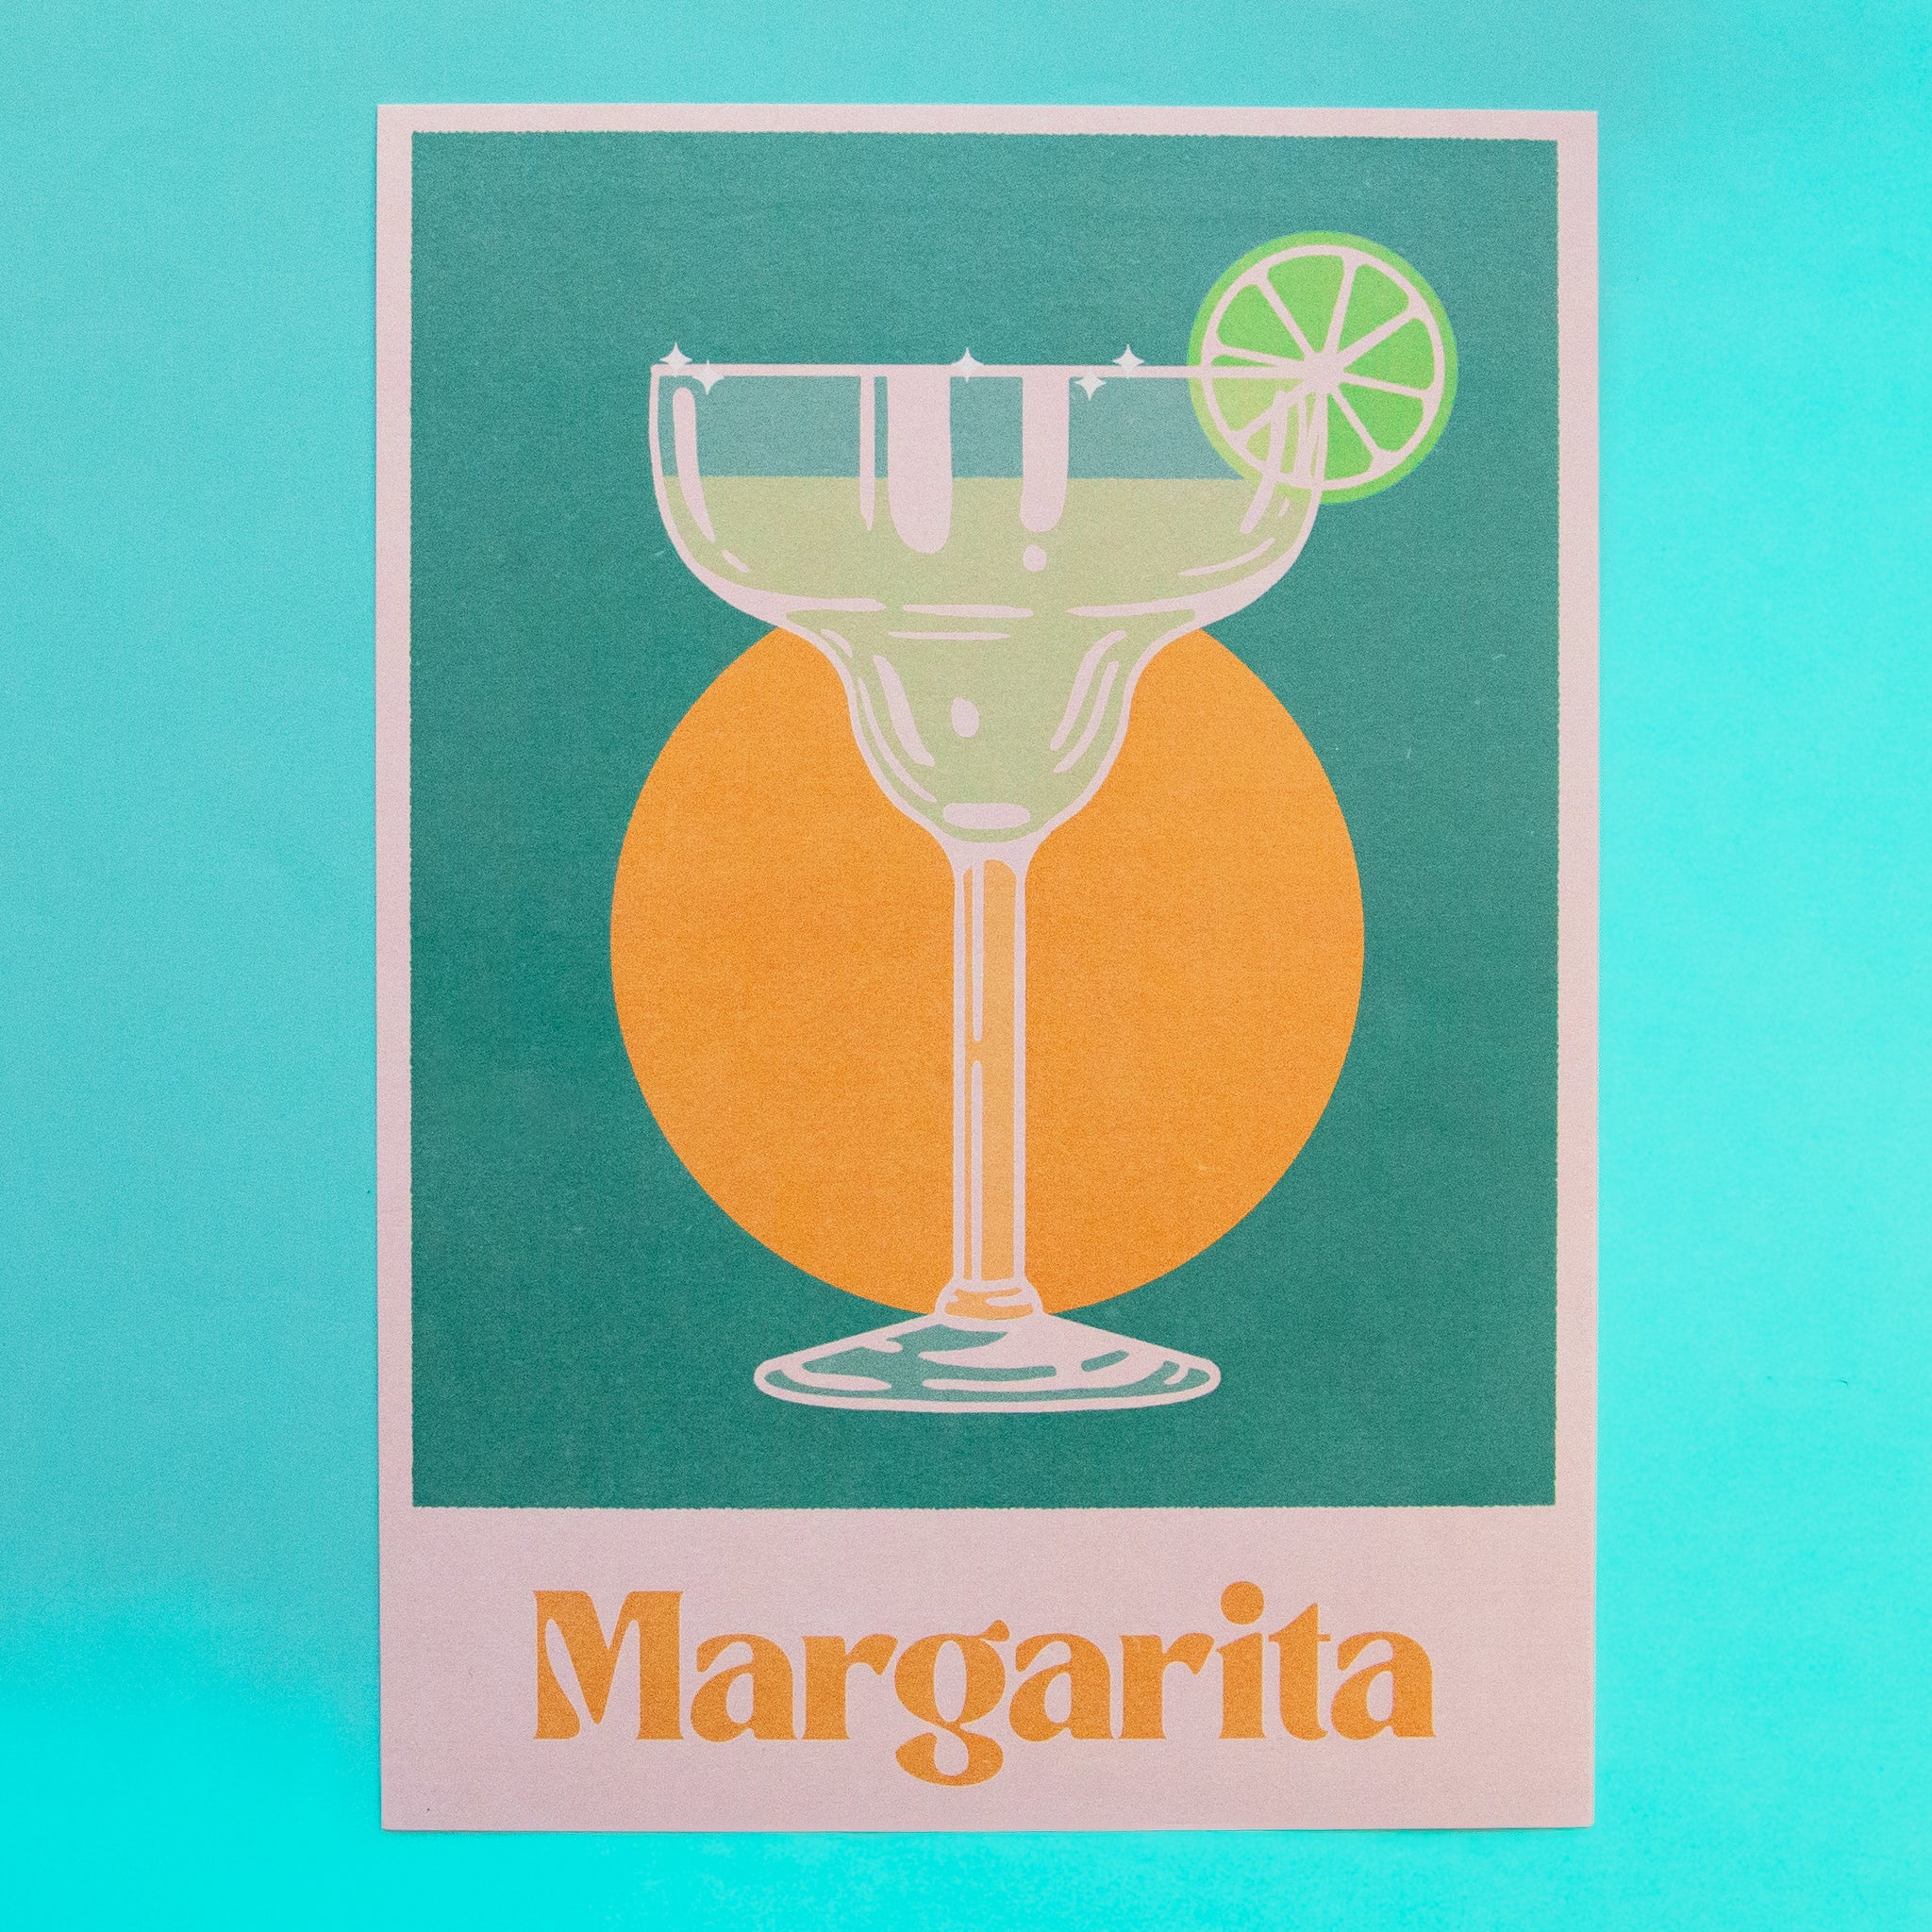 margarita shaped glass with lime wheel on rim over a green background with orange circle. text reads margarita.